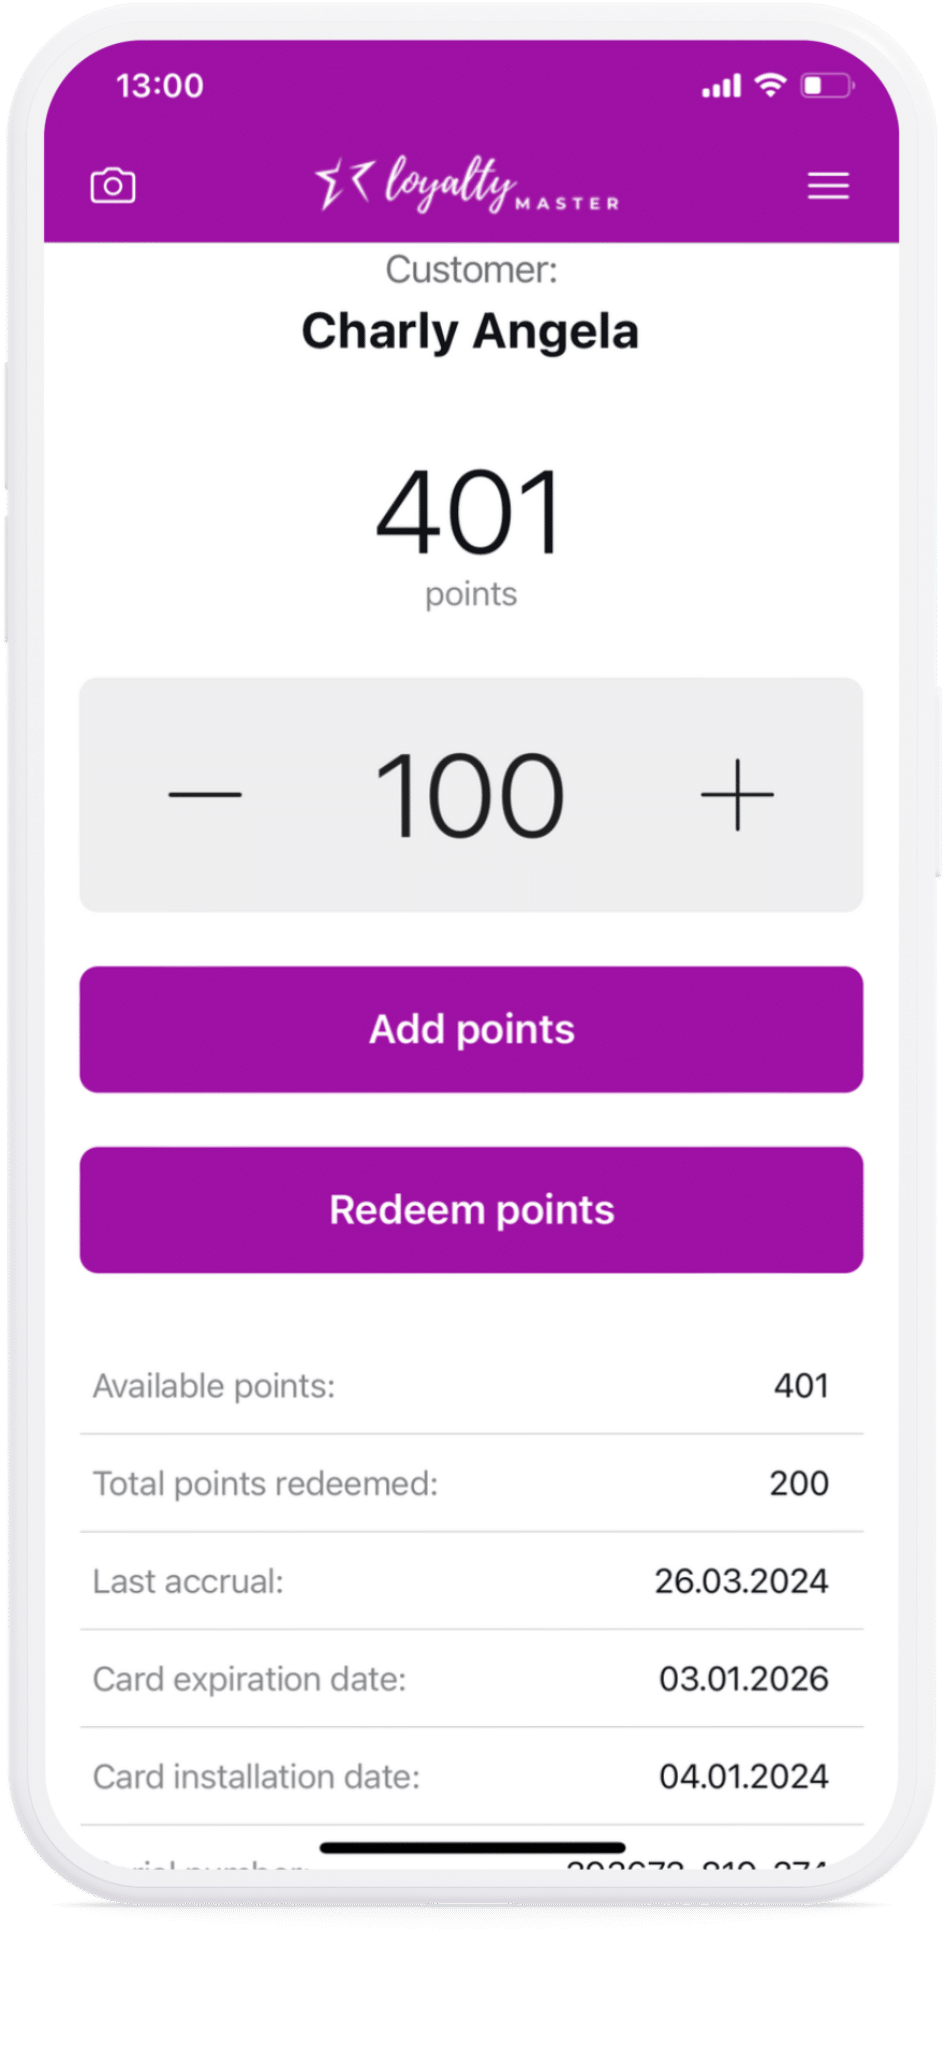 A mobile loyalty program app displaying customer "charly angela" with a balance of 401 points and options to add or redeem points.